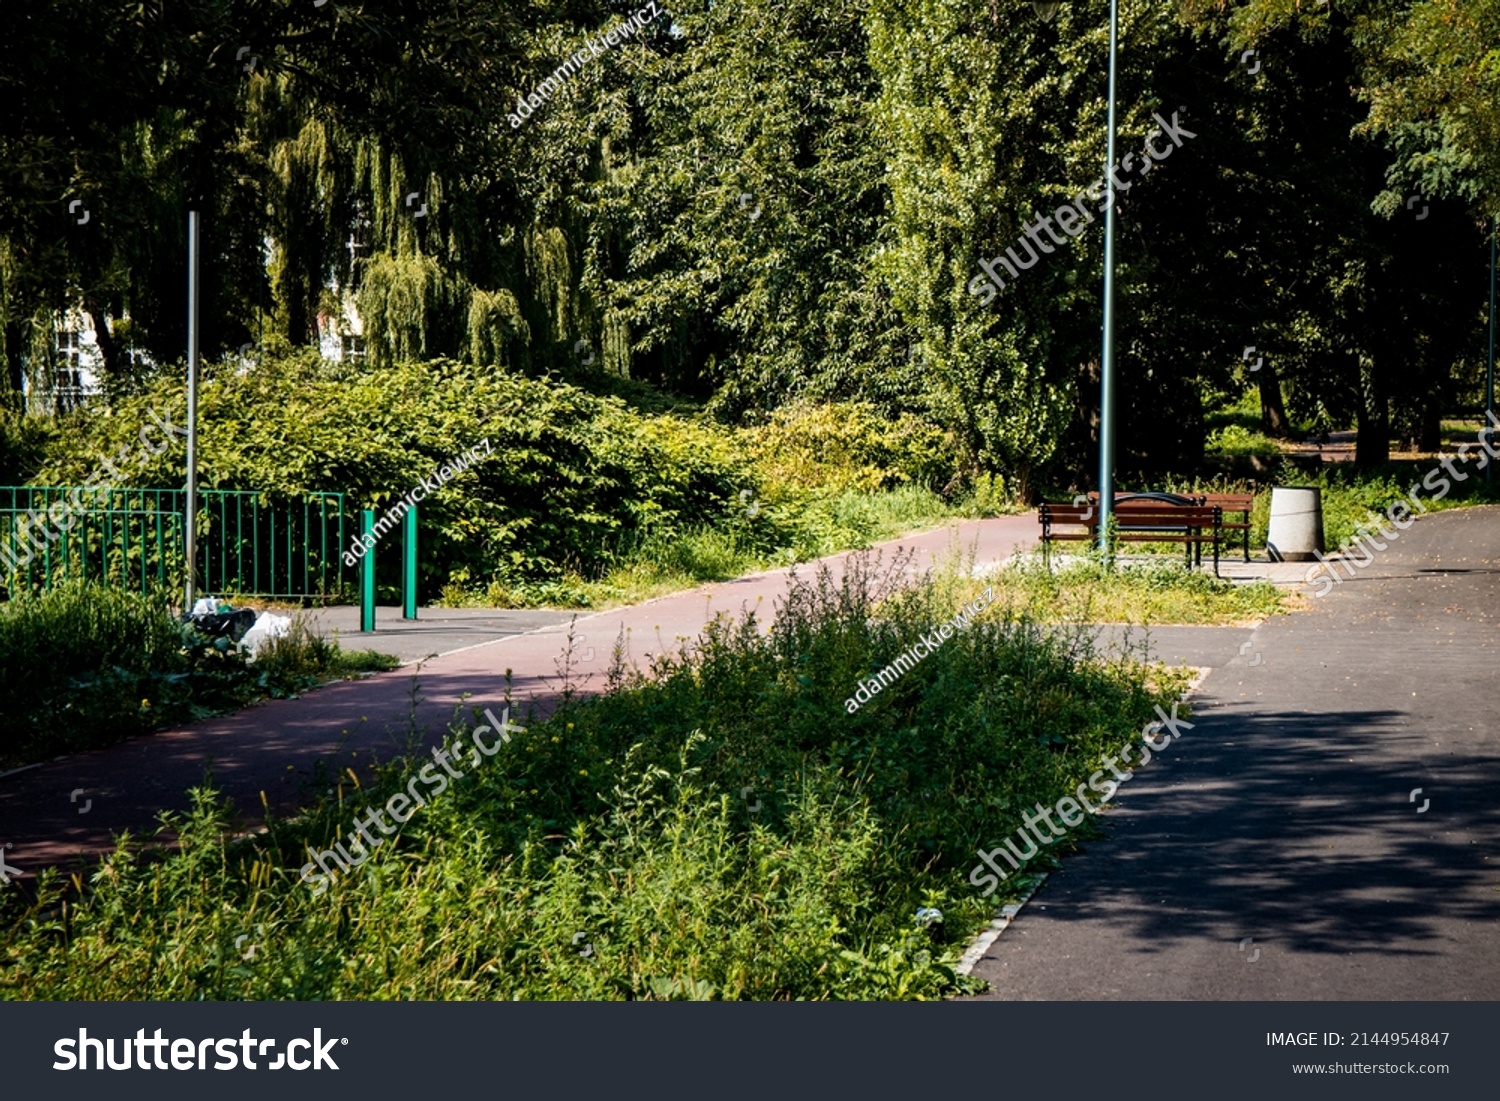 Asphalt footpath and bicycle path surrounded by lawn and trees at the city park #2144954847